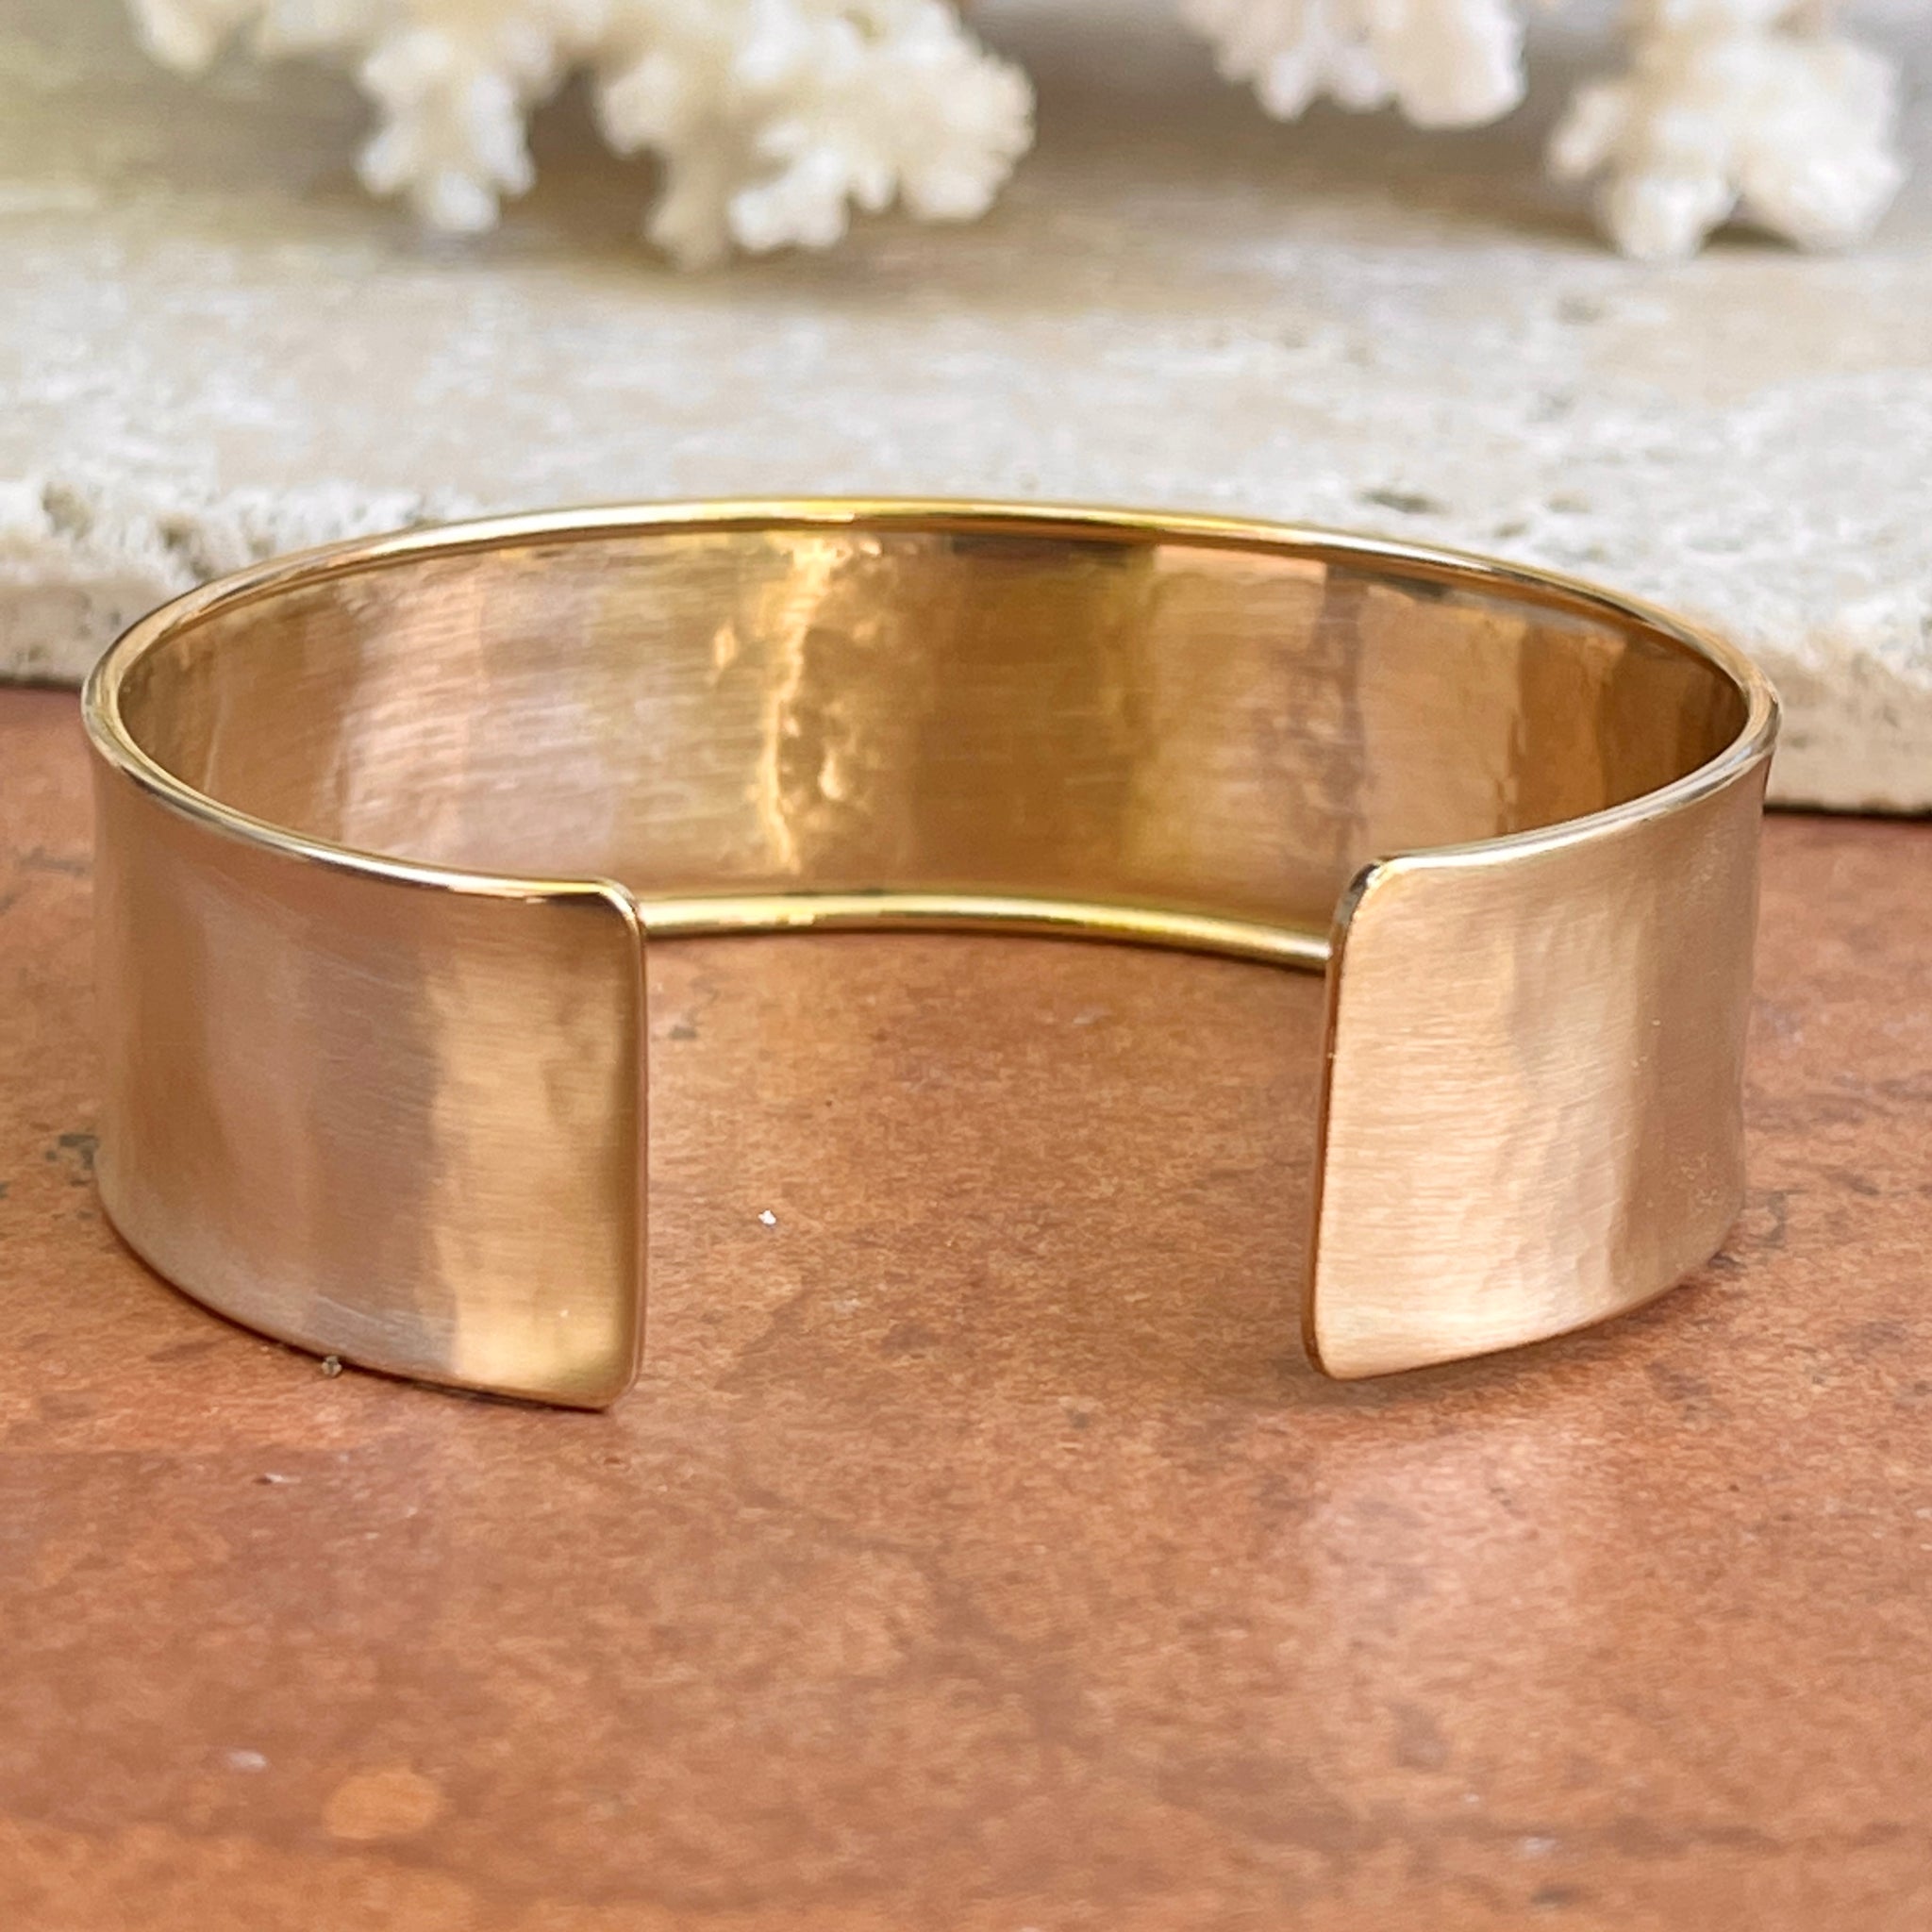 18KT Yellow Gold Hammered Textured Open-Ended Cuff Bangle Bracelet NEW